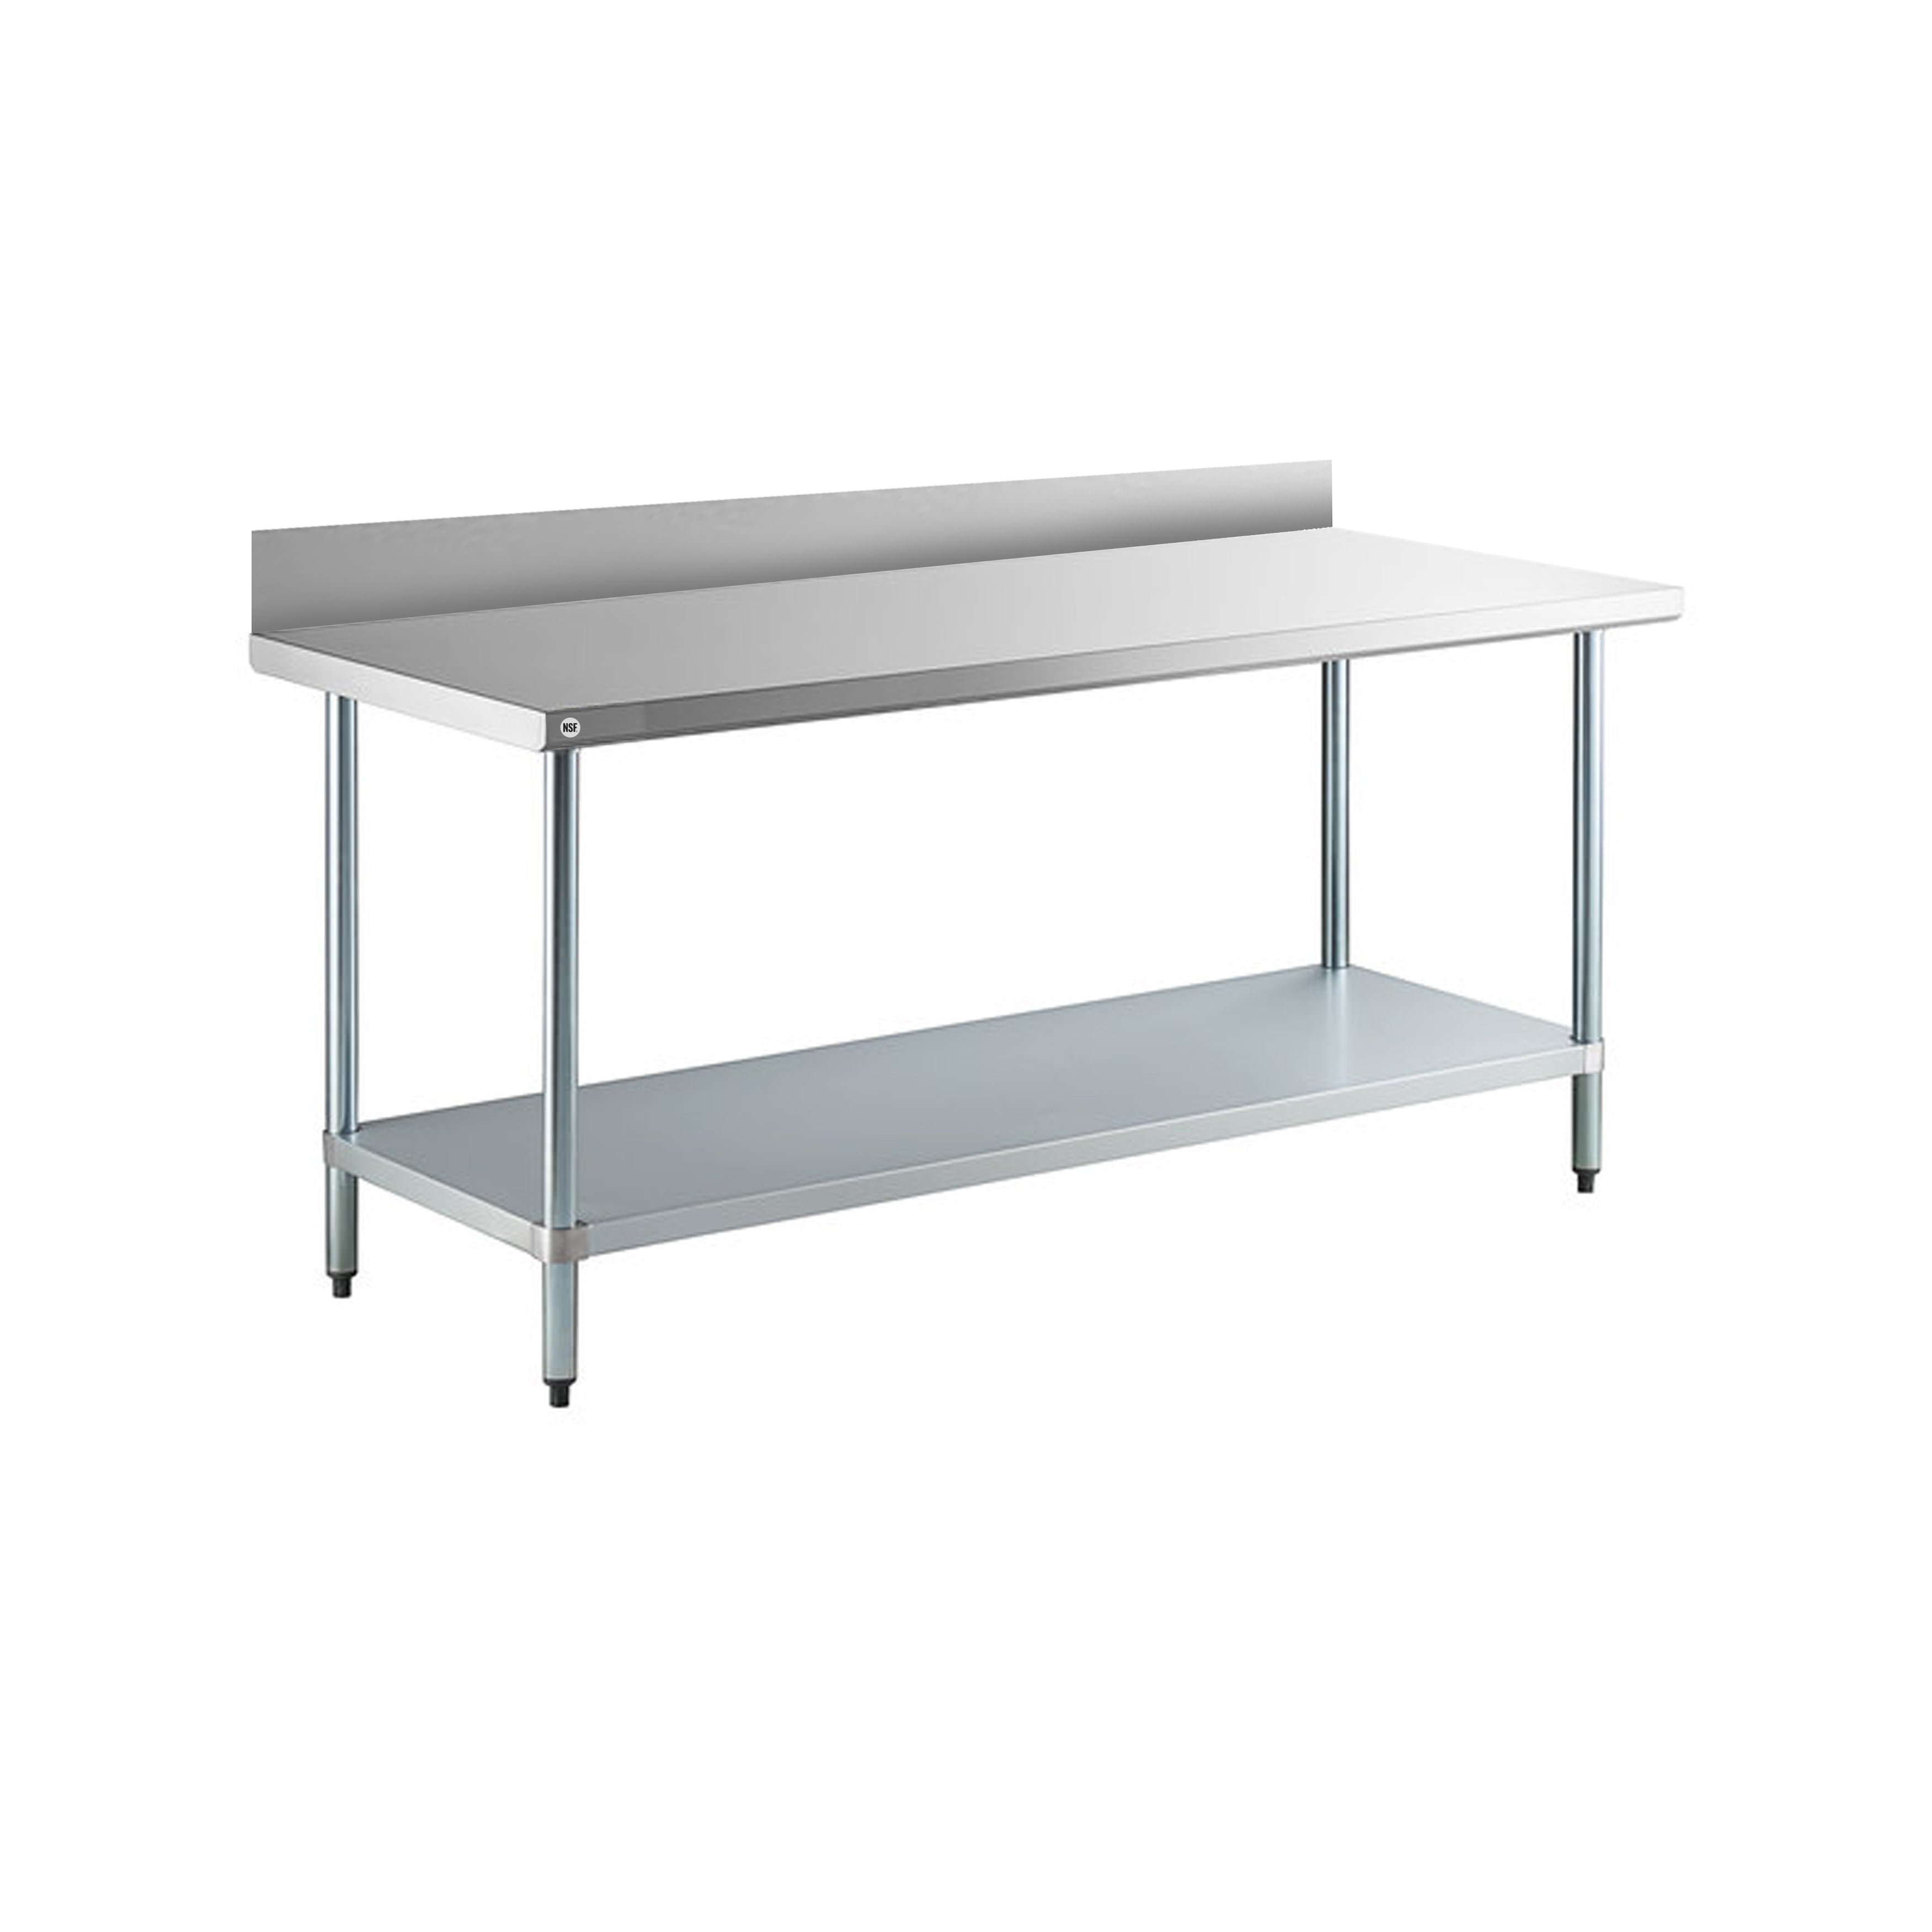 Omcan - 22080, Commercial 24" x 36" Stainless Steel Kitchen Work Table with 4" BackSplash 900lbs Light Duty